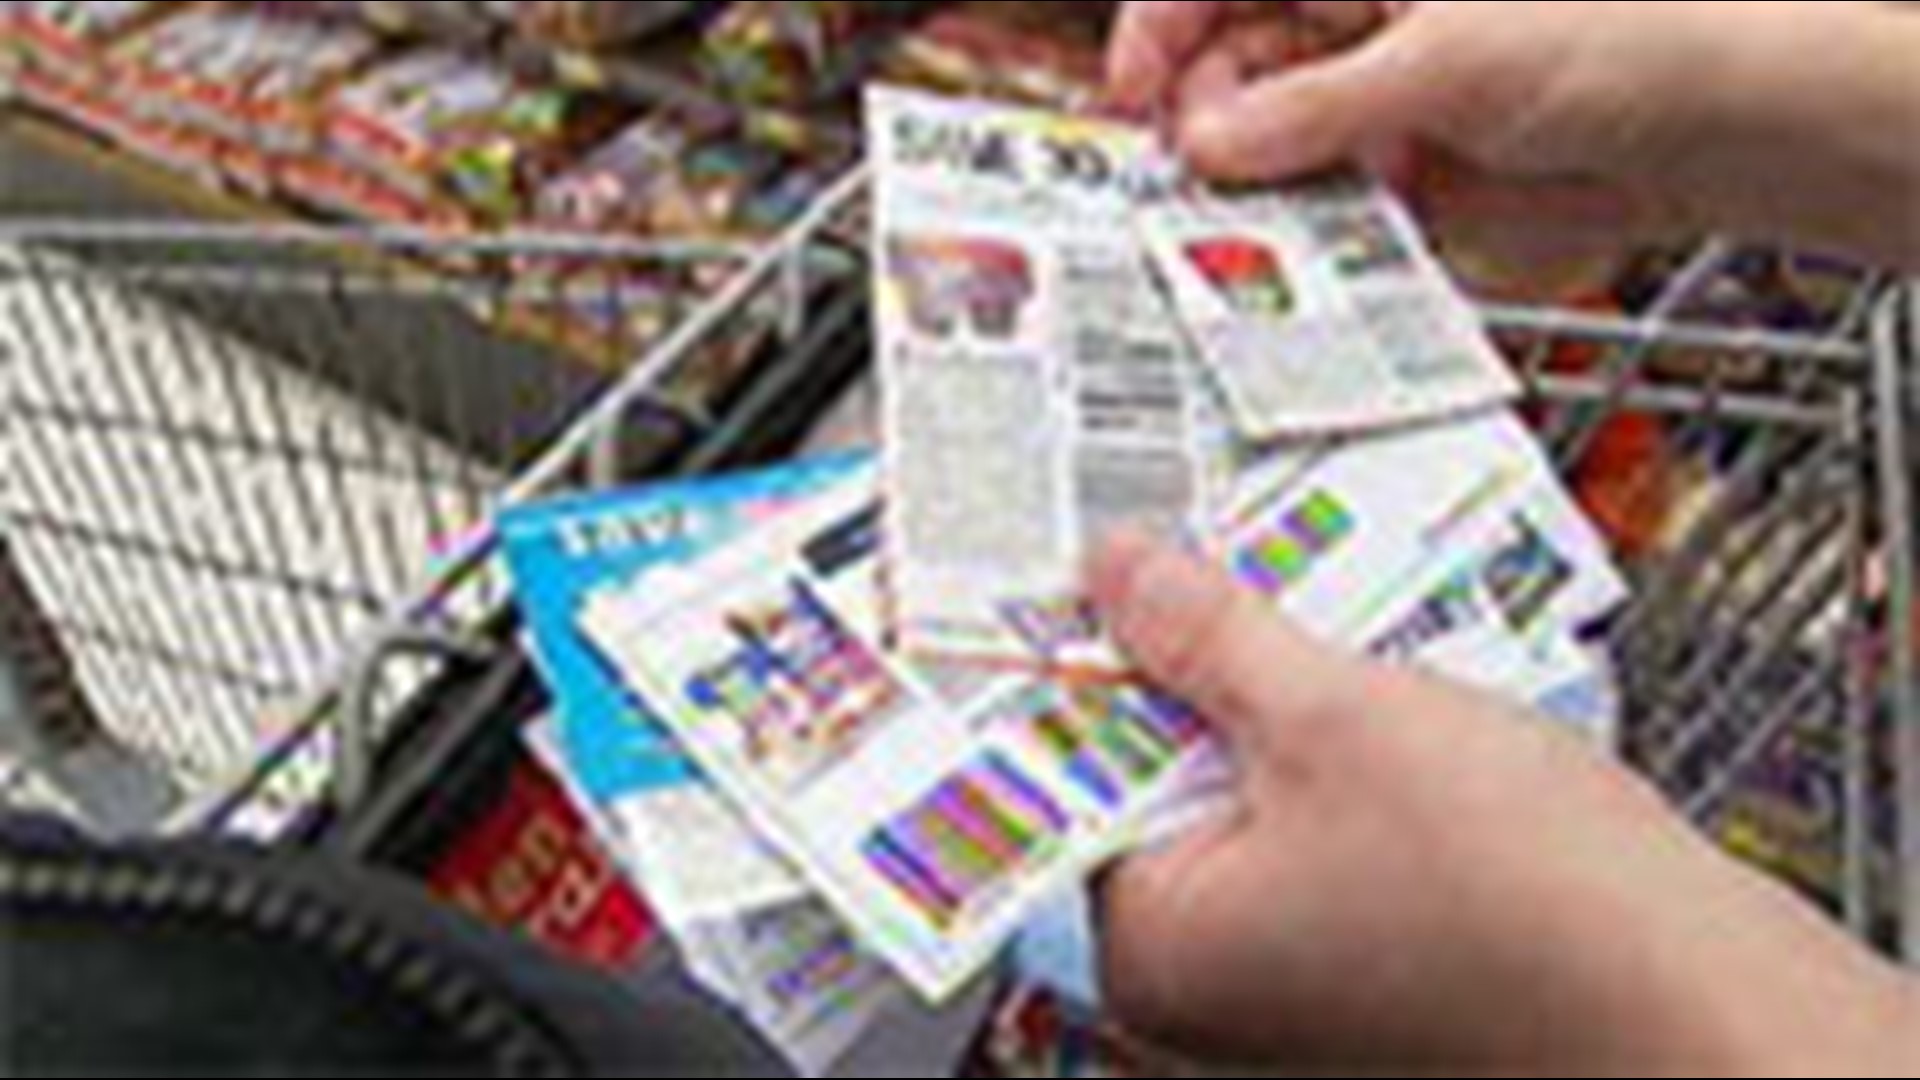 The days of clipping coupons are fading away, as digital couponing soars and people find new ways to make money while shopping.